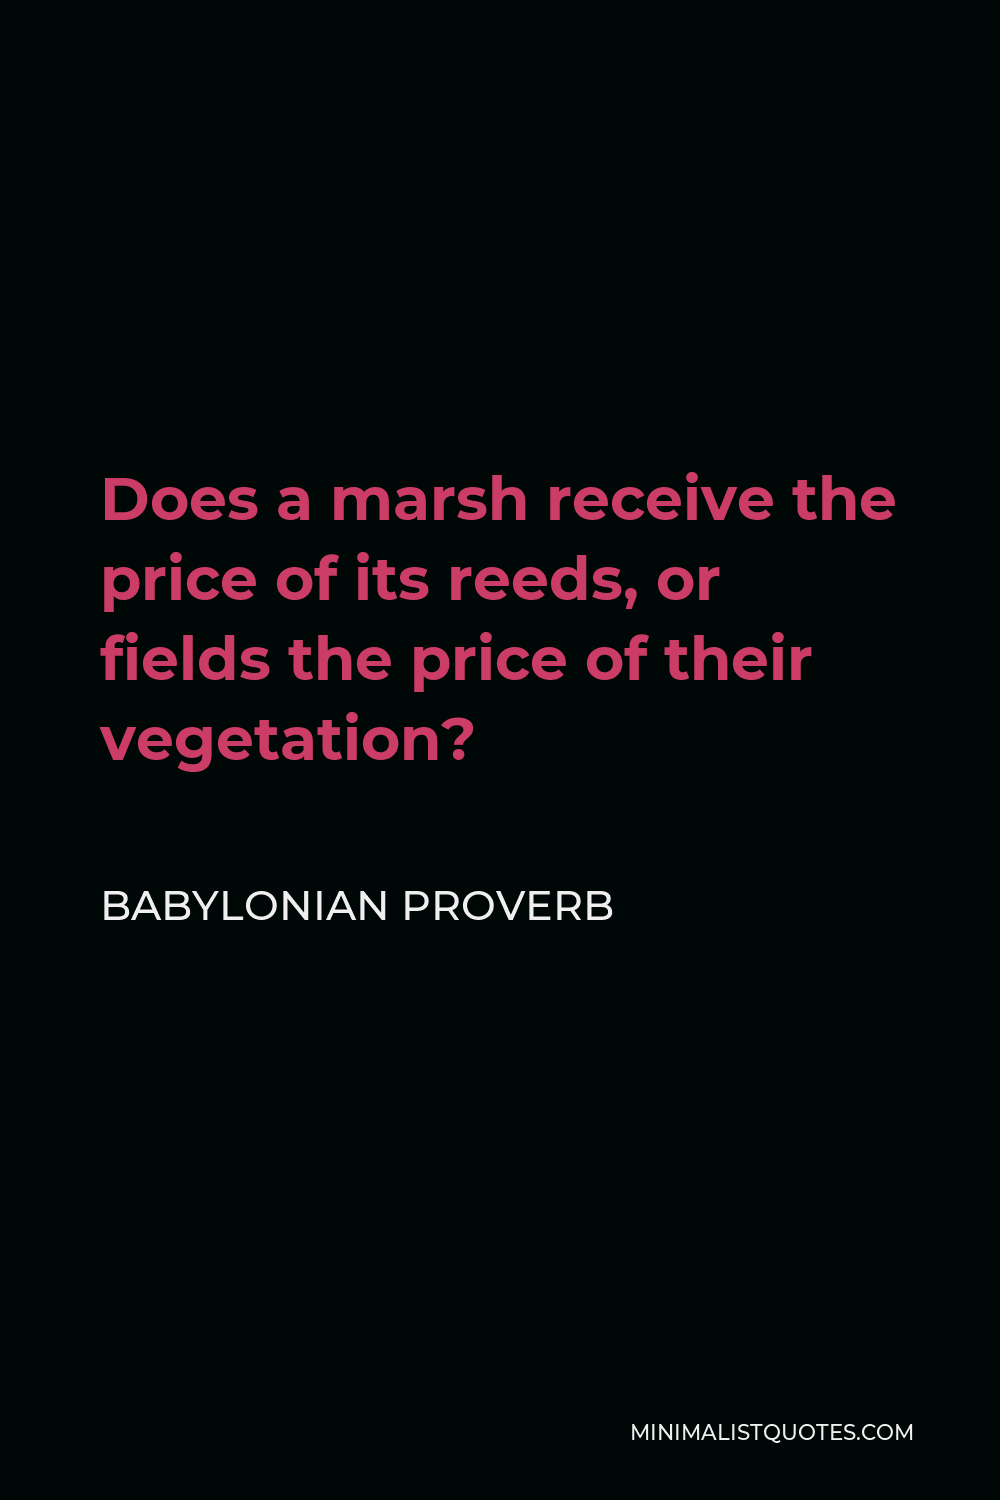 Babylonian Proverb Quote - Does a marsh receive the price of its reeds, or fields the price of their vegetation?